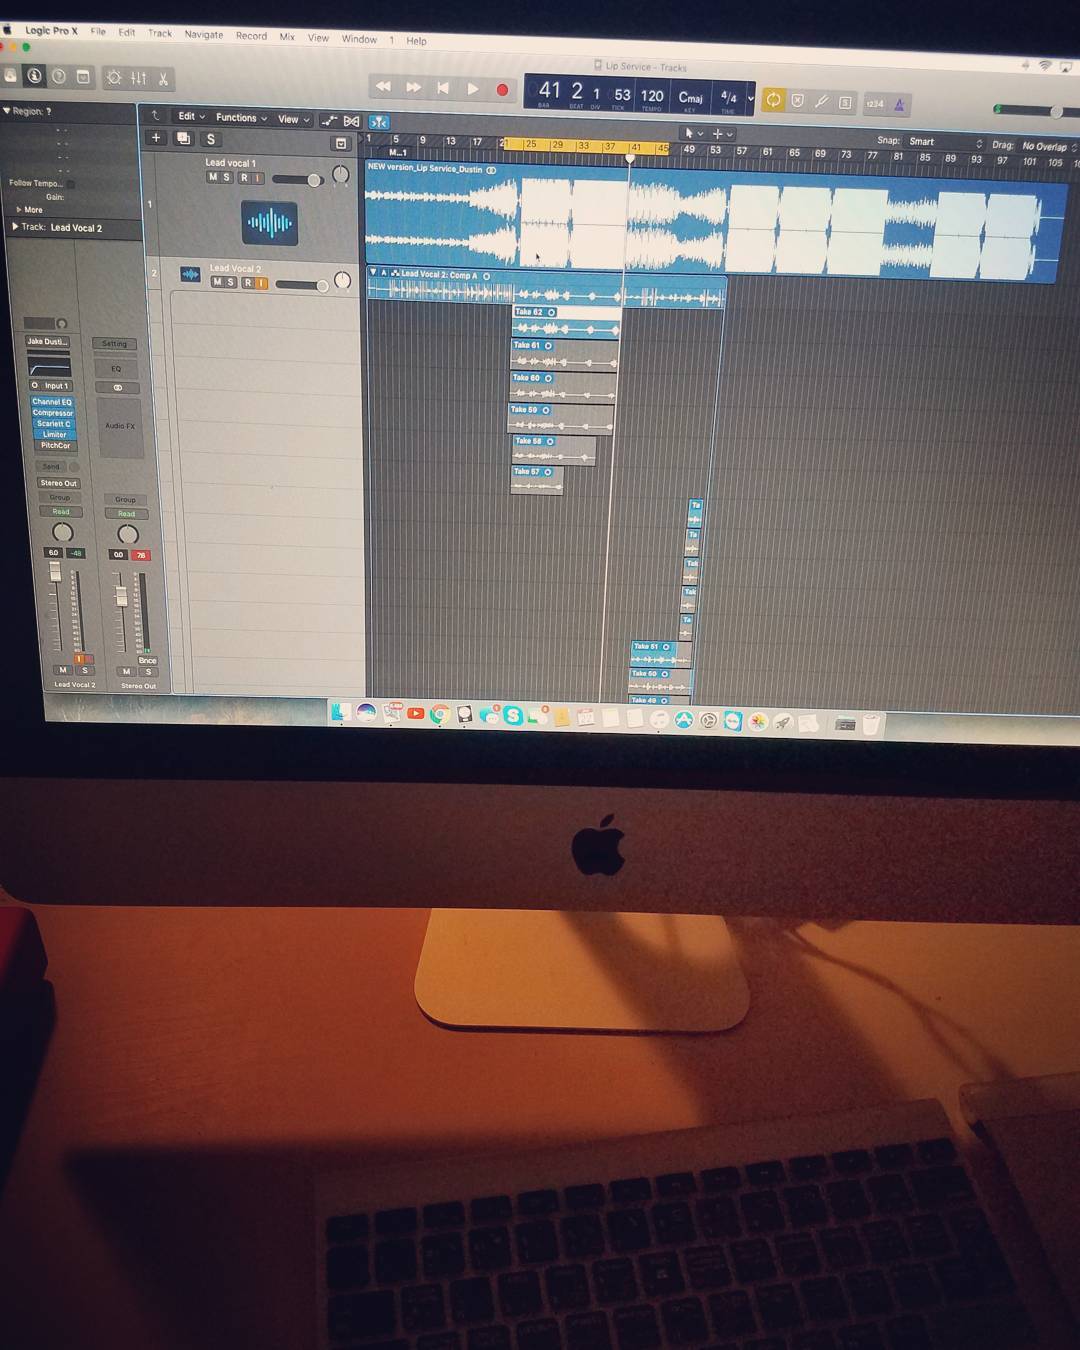 New #logicprox update has a friggin gorgeous new brighter color scheme (cannot be seen in an instagram pic) and its sooo #fresh #recording #singersongwriter #singers #musicians #musicgrind #studio #tracking #colors #protools #ableton #vocals #latenightsessions